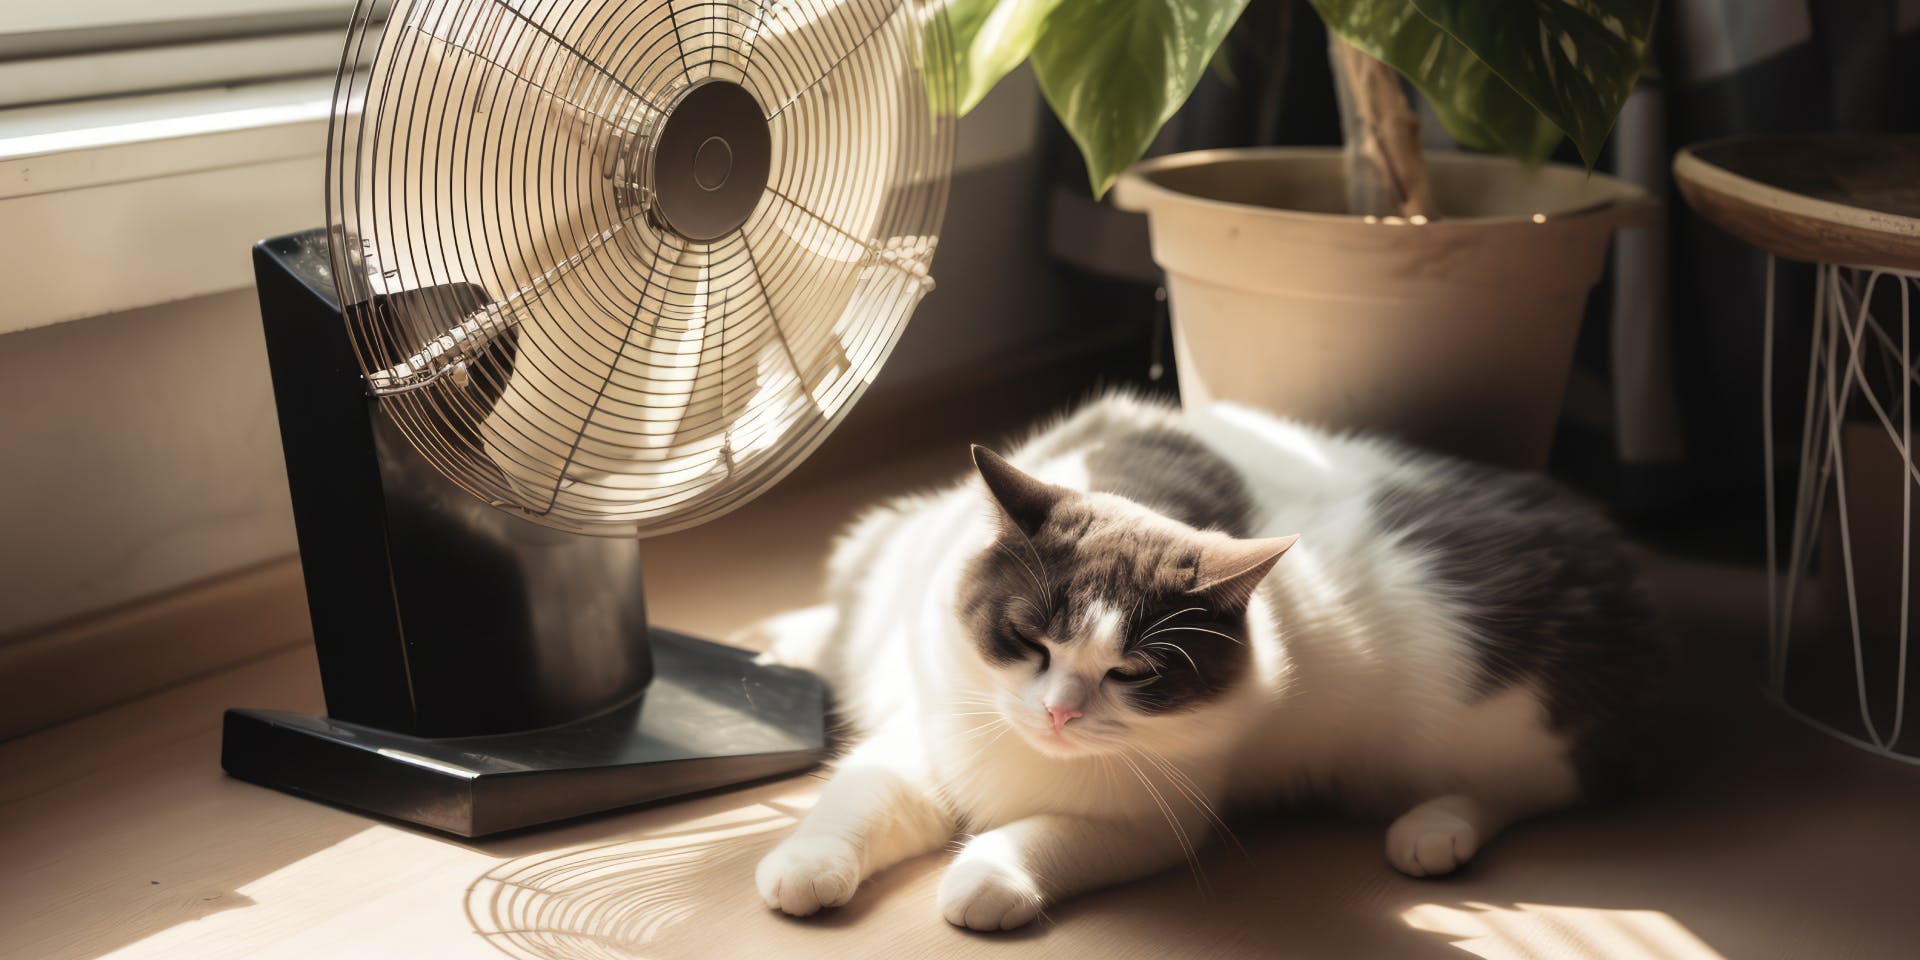 A gray and white cat sitting in the sun next to a fan.